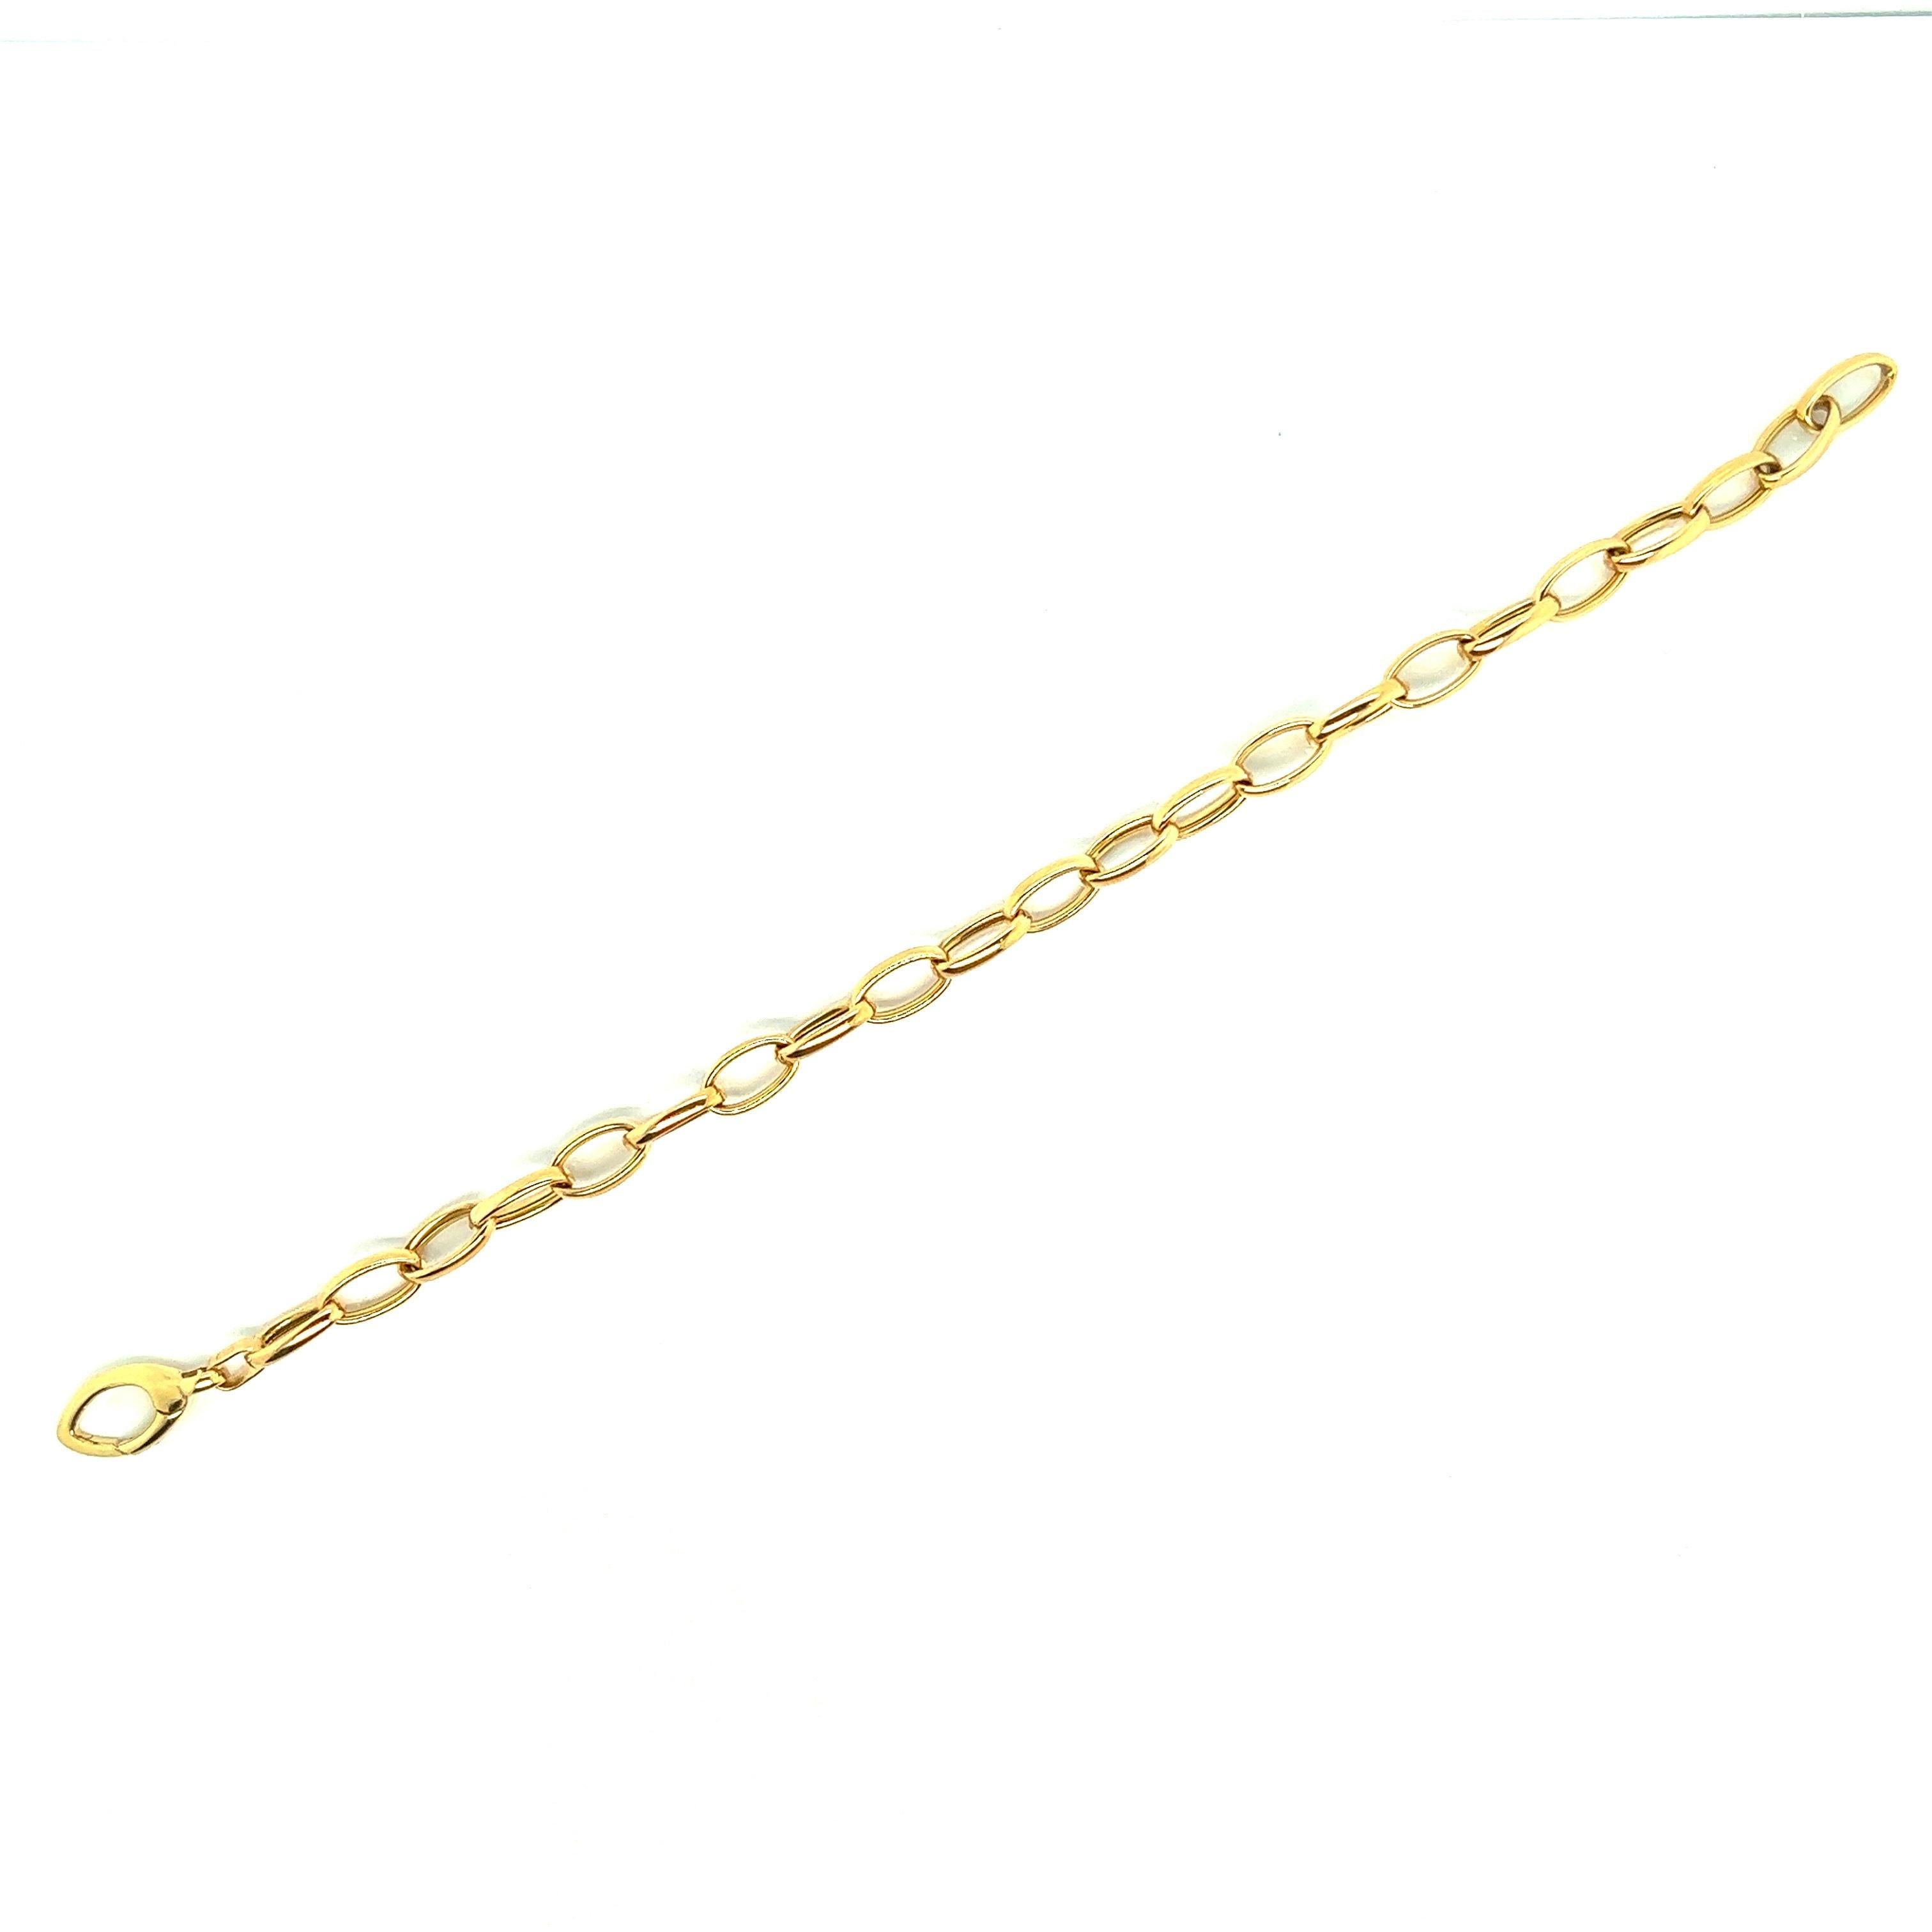 Discover this superb 18-carat yellow gold bracelet with small French links. This bracelet is both elegant and refined, bringing a touch of class to your look. Thanks to its meticulous design, it offers a chic, timeless style.

The bracelet features